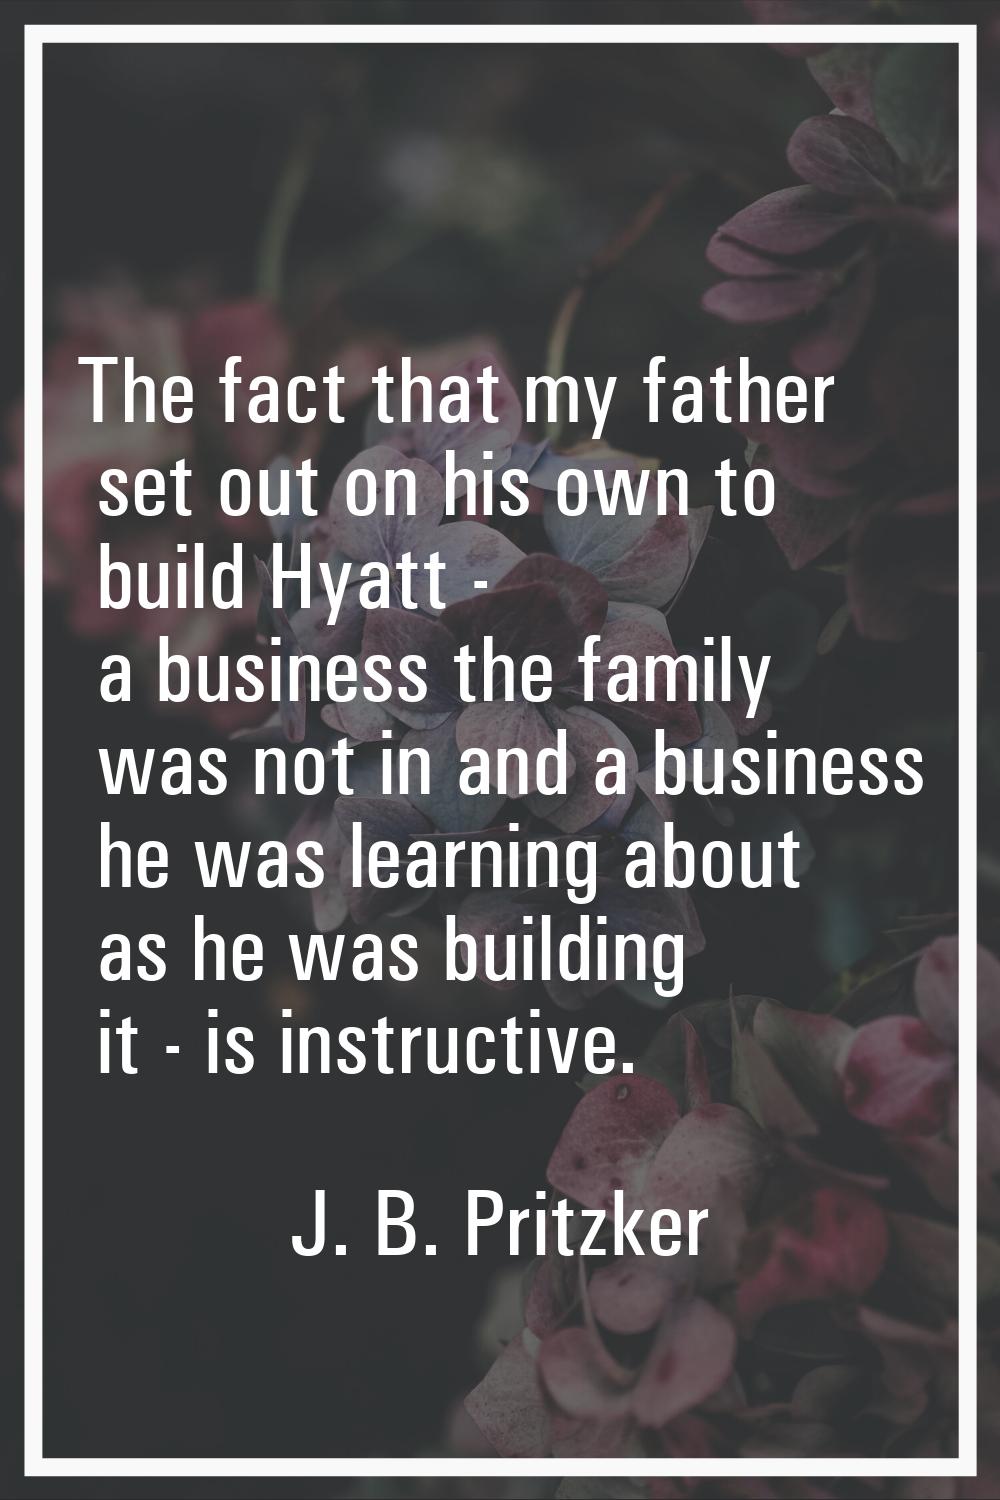 The fact that my father set out on his own to build Hyatt - a business the family was not in and a 